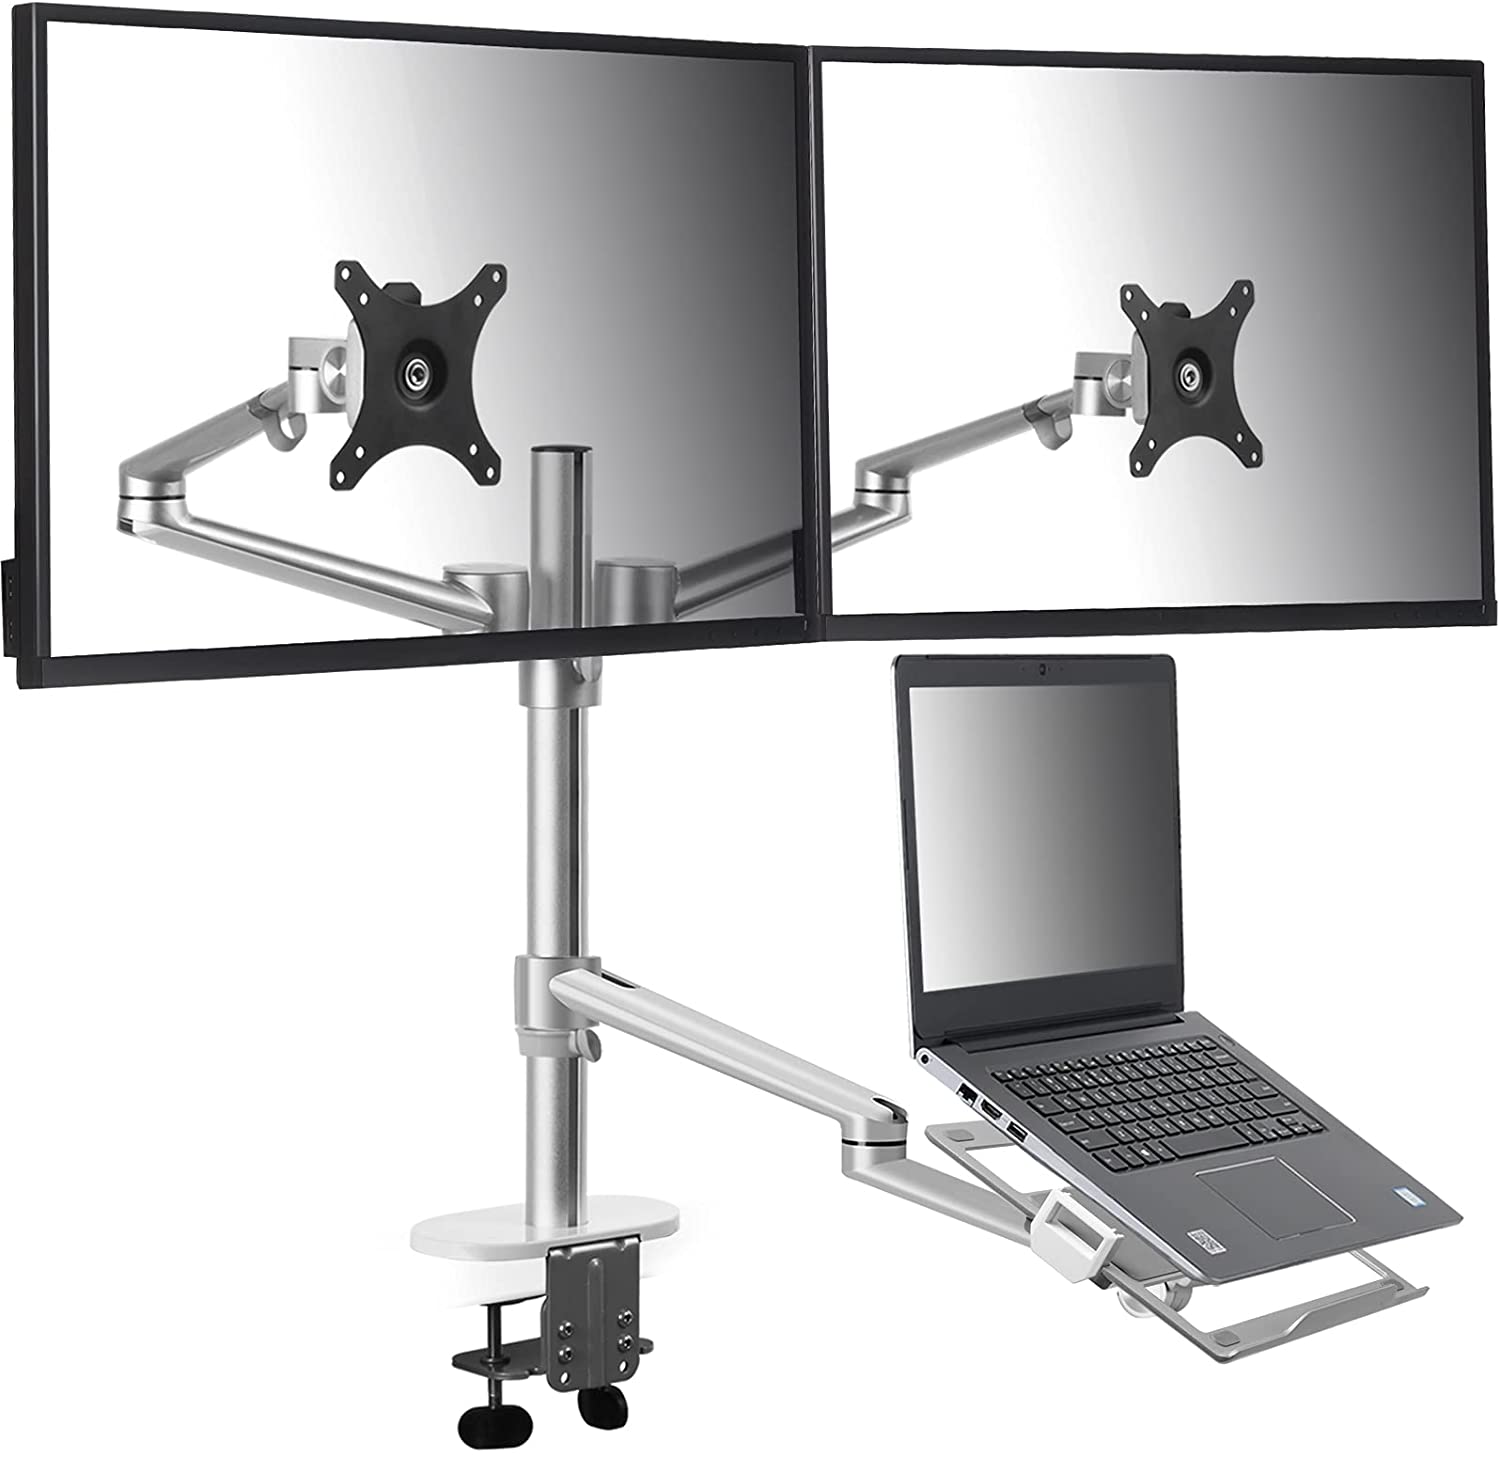 Monitor and Laptop Mount, in Adjustable Triple Monitor Arm Desk Mounts,  Dual Desk Arm Stand/Holder for 17 to 27 Inch LCD Computer Screens, Extra  Tray Fits 12 to 17 inch